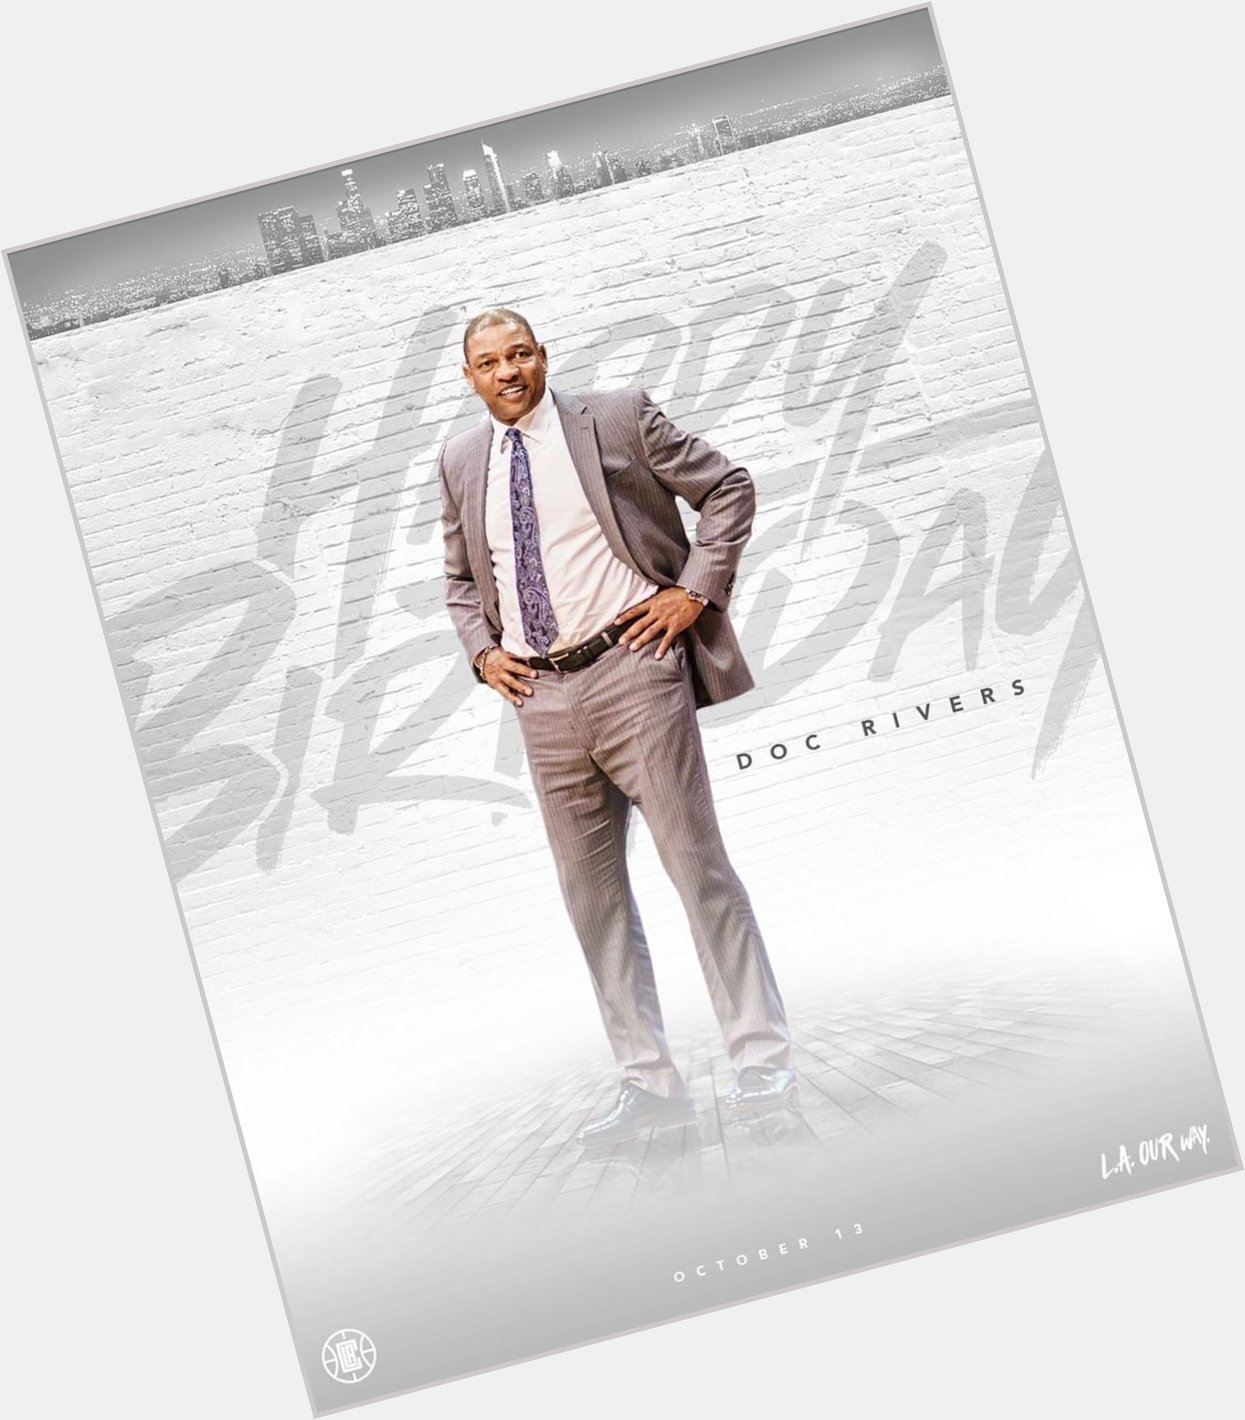 Wishing the one and only Doc Rivers a happy birthday! 